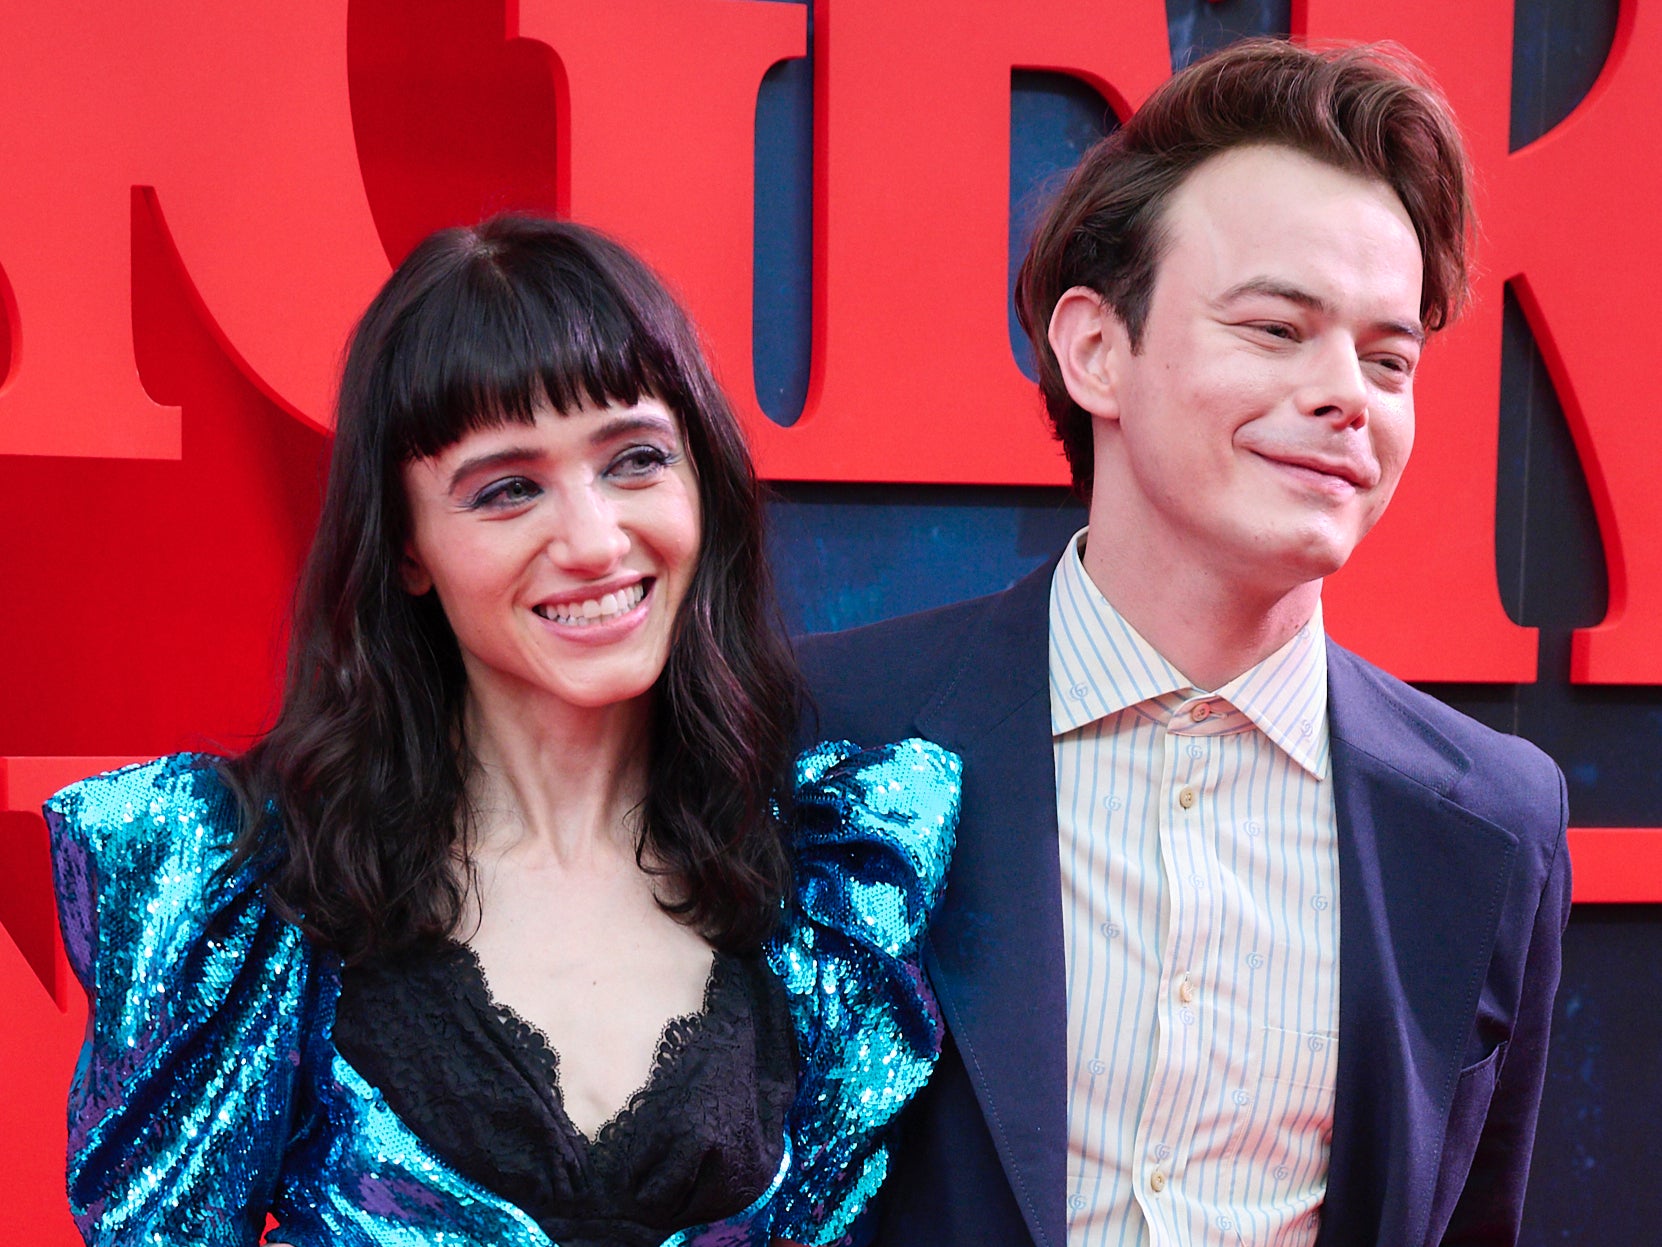 Natalia Dyer and Charlie Heaton at the premiere for season 4 of Stranger Things in 2022